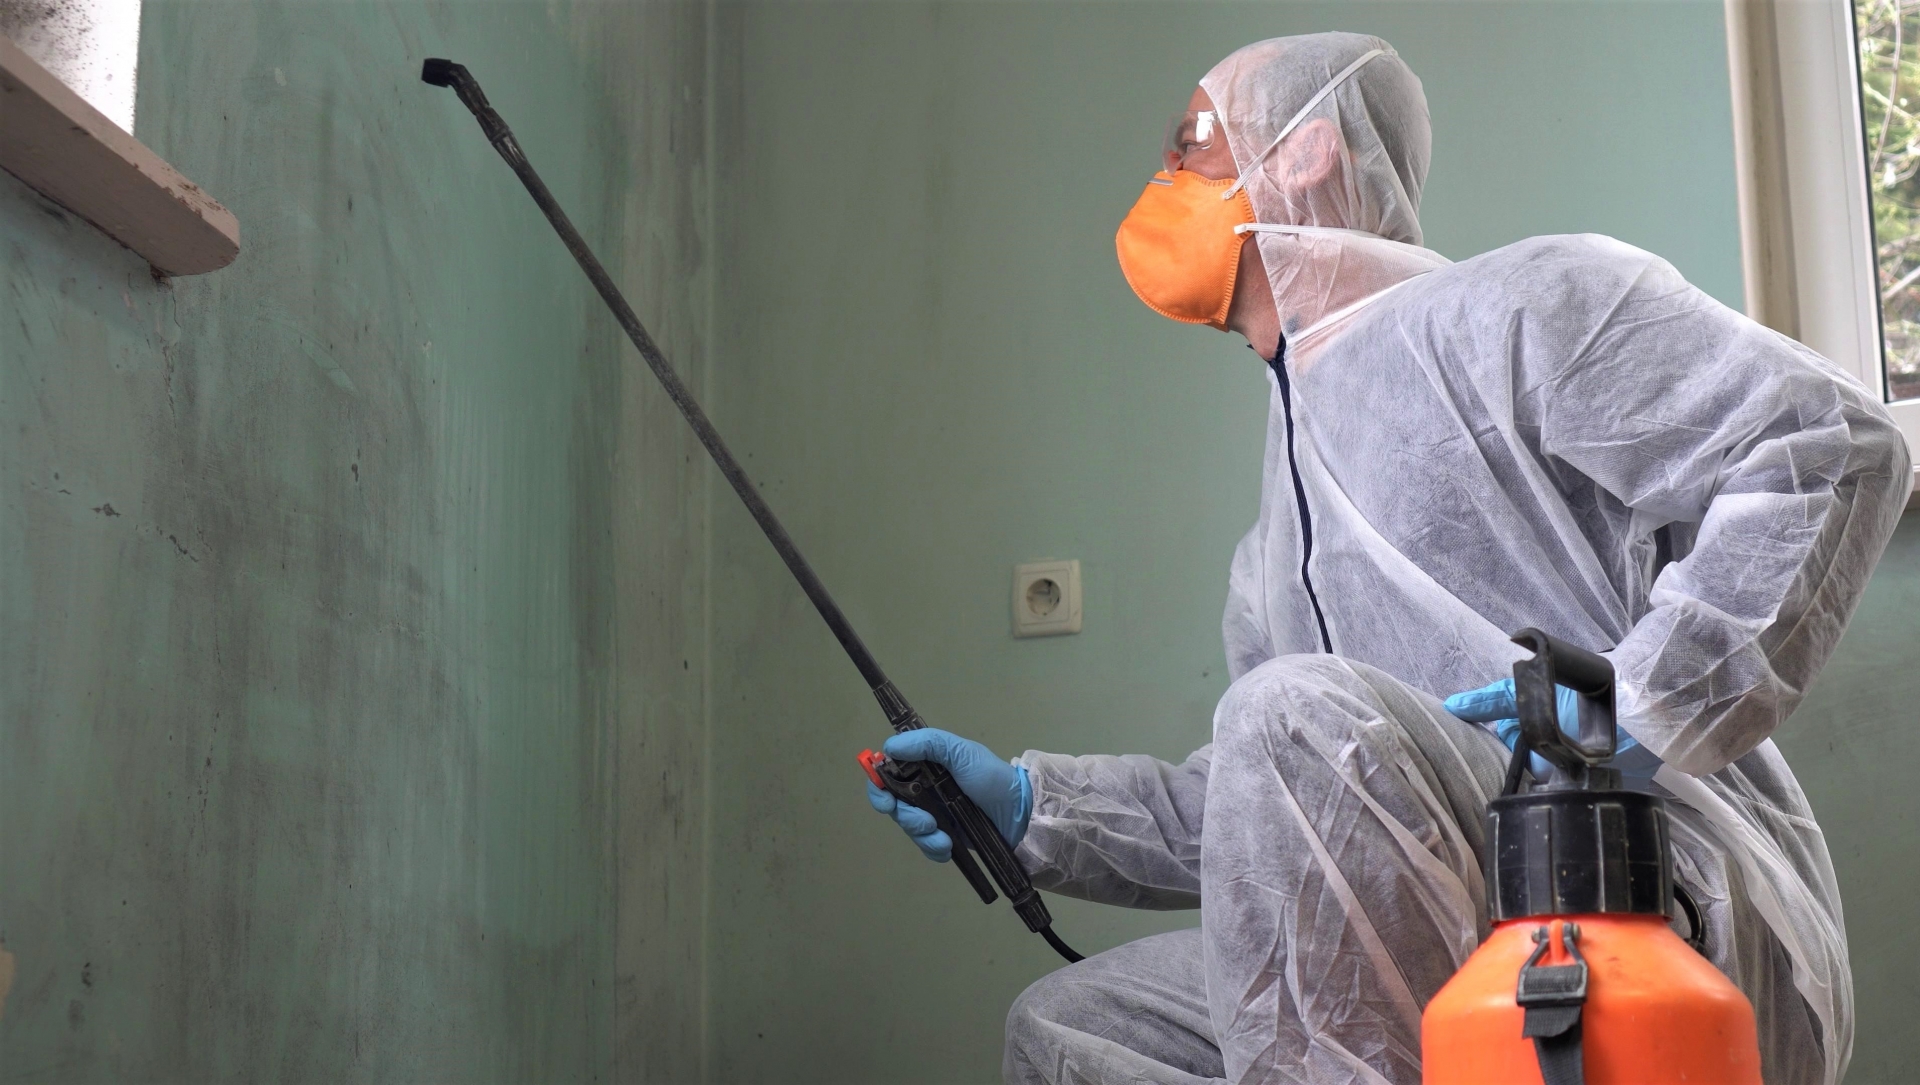 a mold remediation expert spraying mold removal solution on a wall to remove mold.